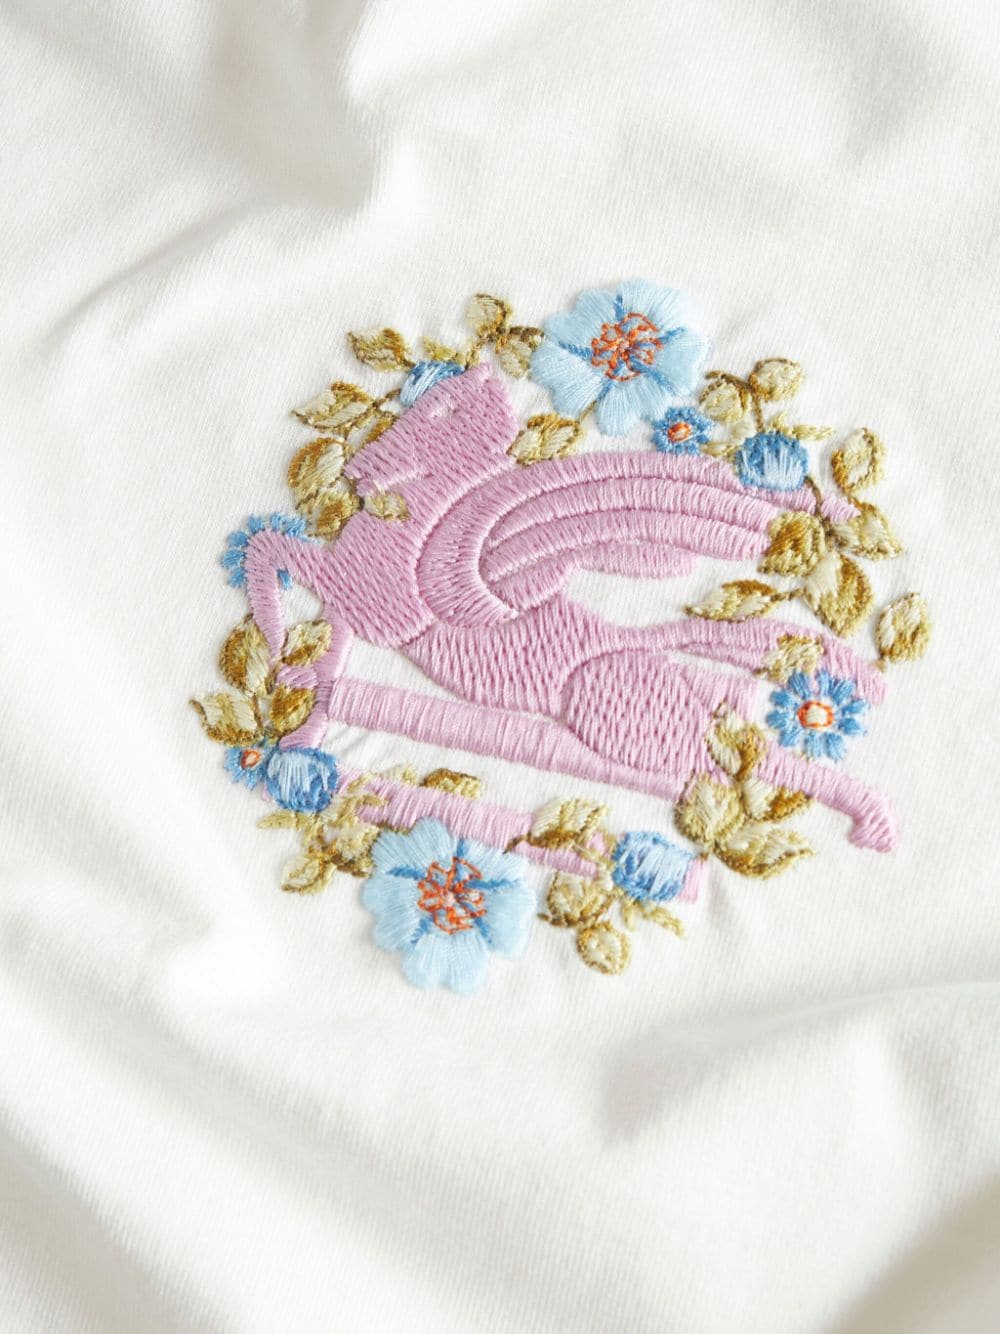 T-shirt with Pegasus embroidery